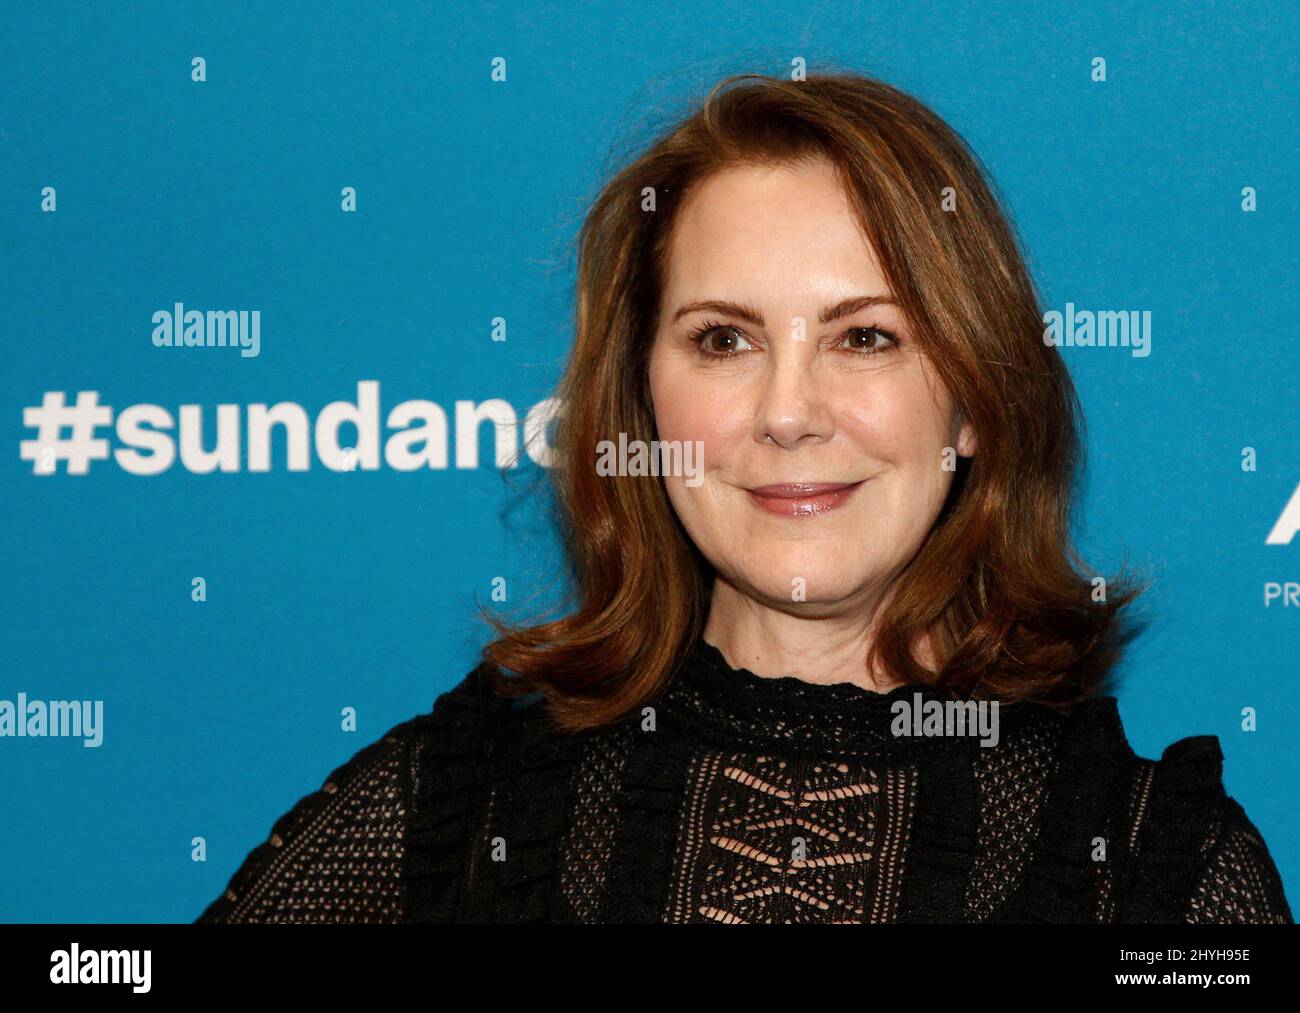 Elizabeth Perkins at the premiere of 'After The Wedding' during the 2019 Sundance Film Festival held at the Eccles Theatre on January 24, 2019 in Park City, UT. Stock Photo